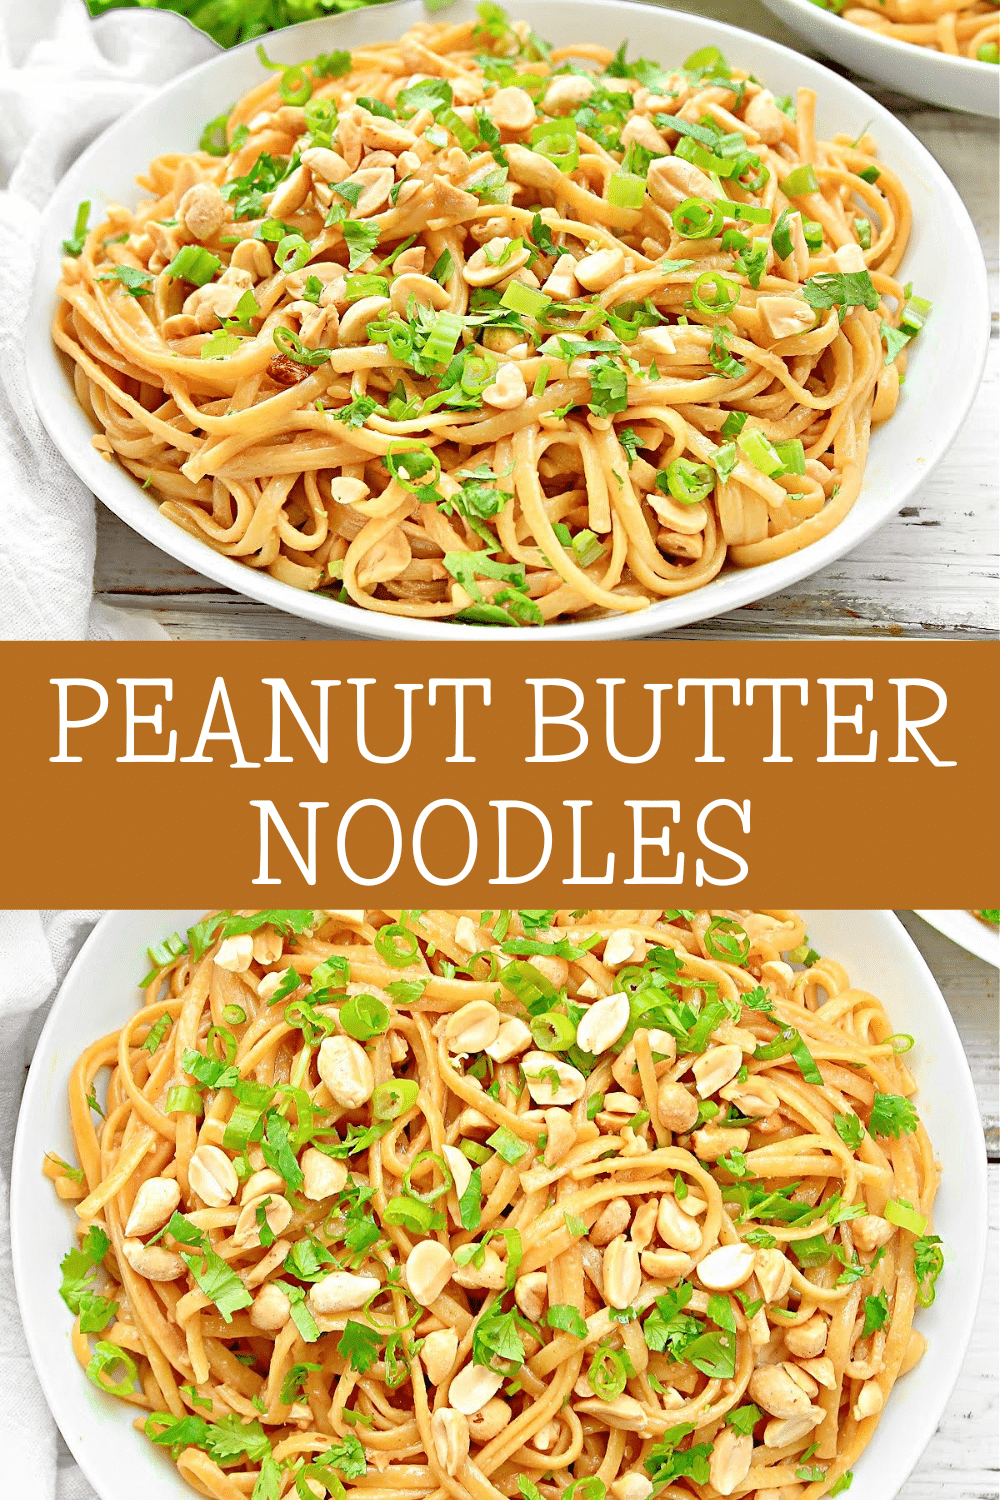 Peanut Butter Noodles ~ Comforting noodles in a creamy Asian-inspired peanut butter sauce. Ready in 30 minutes or less! via @thiswifecooks